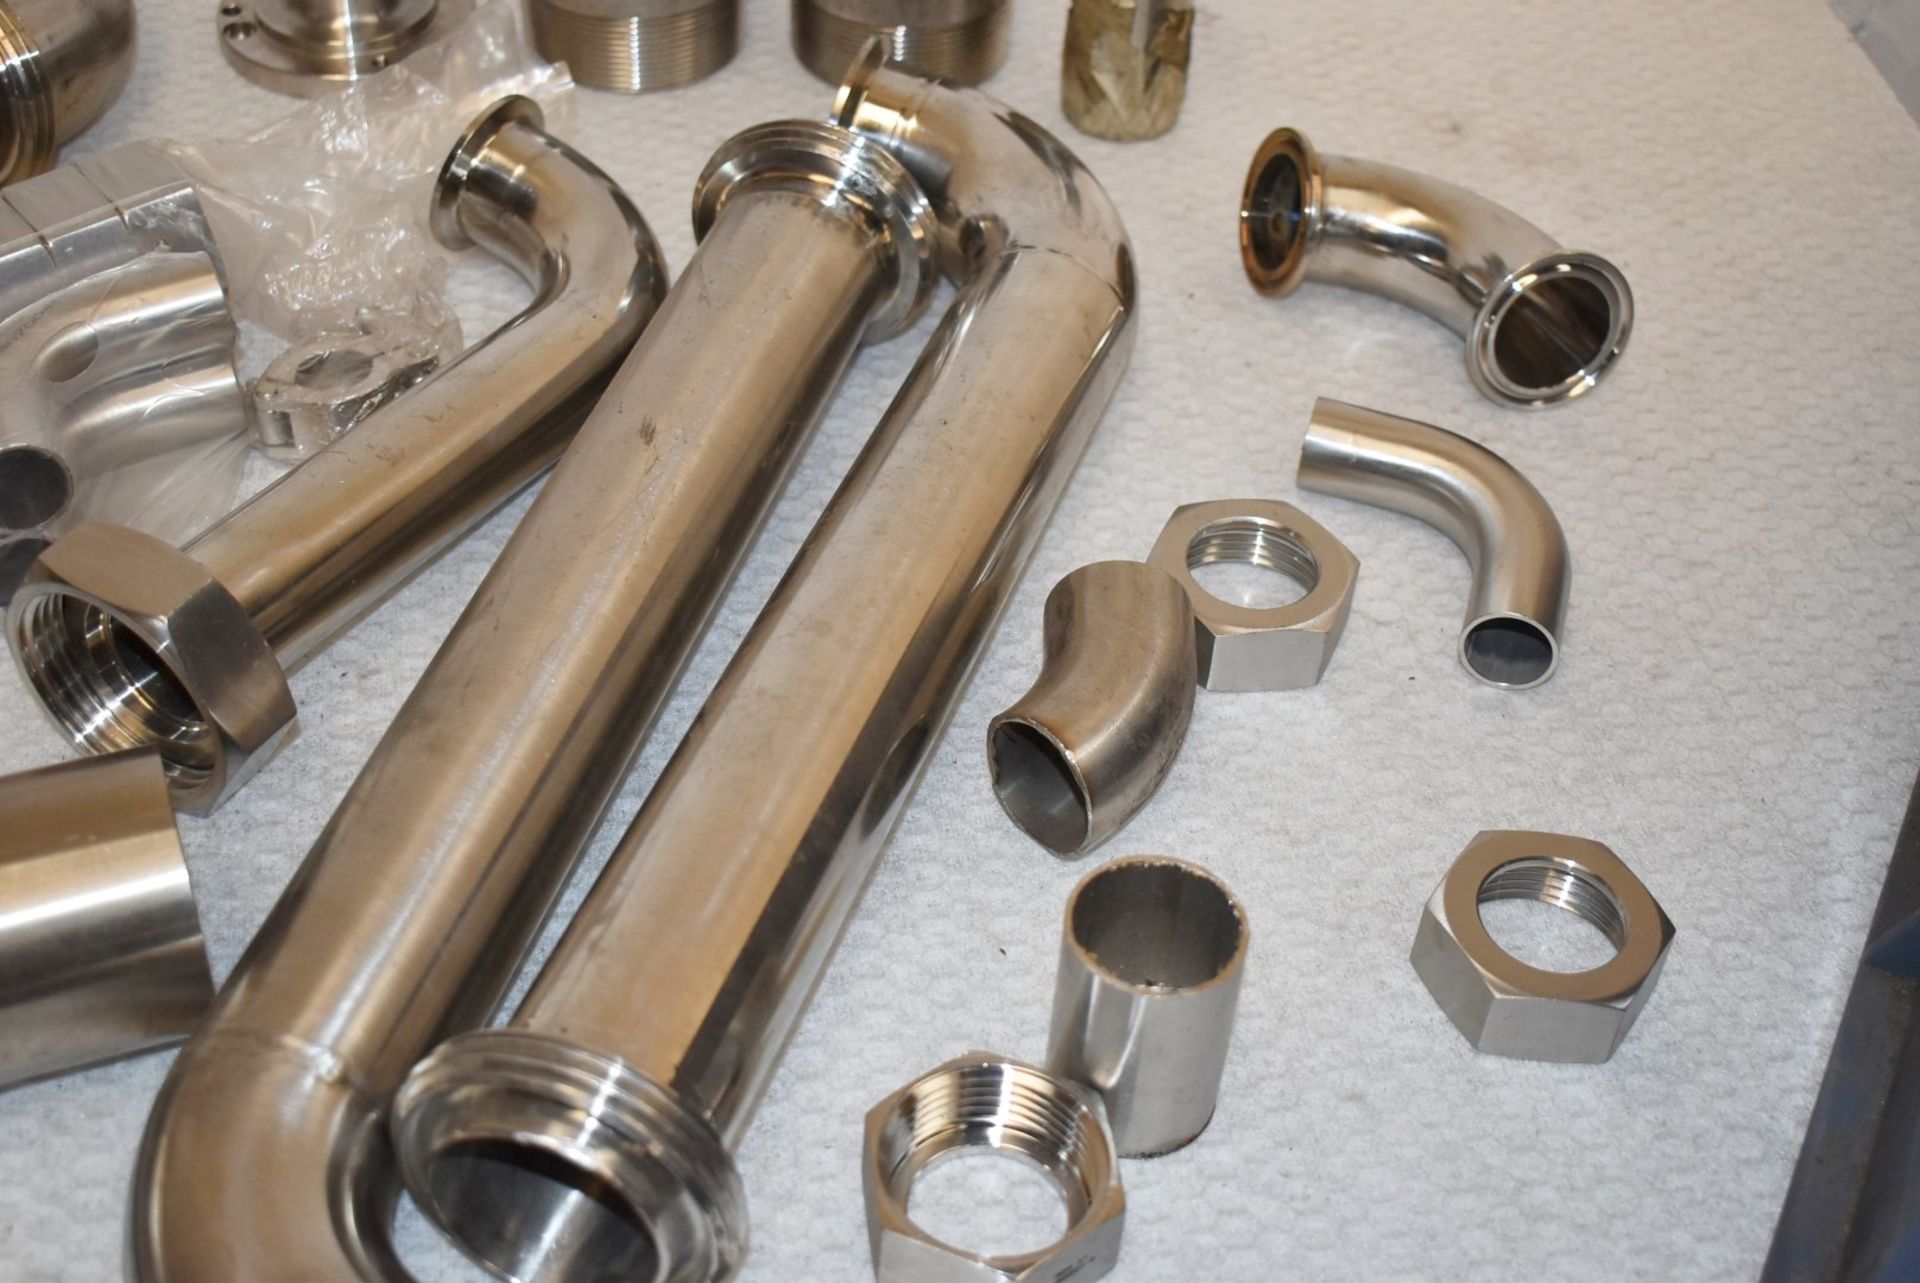 Assorted Job Lot of Stainless Steel Fittings For Brewery Equipment - Includes Approx 38 Pieces - - Image 11 of 13